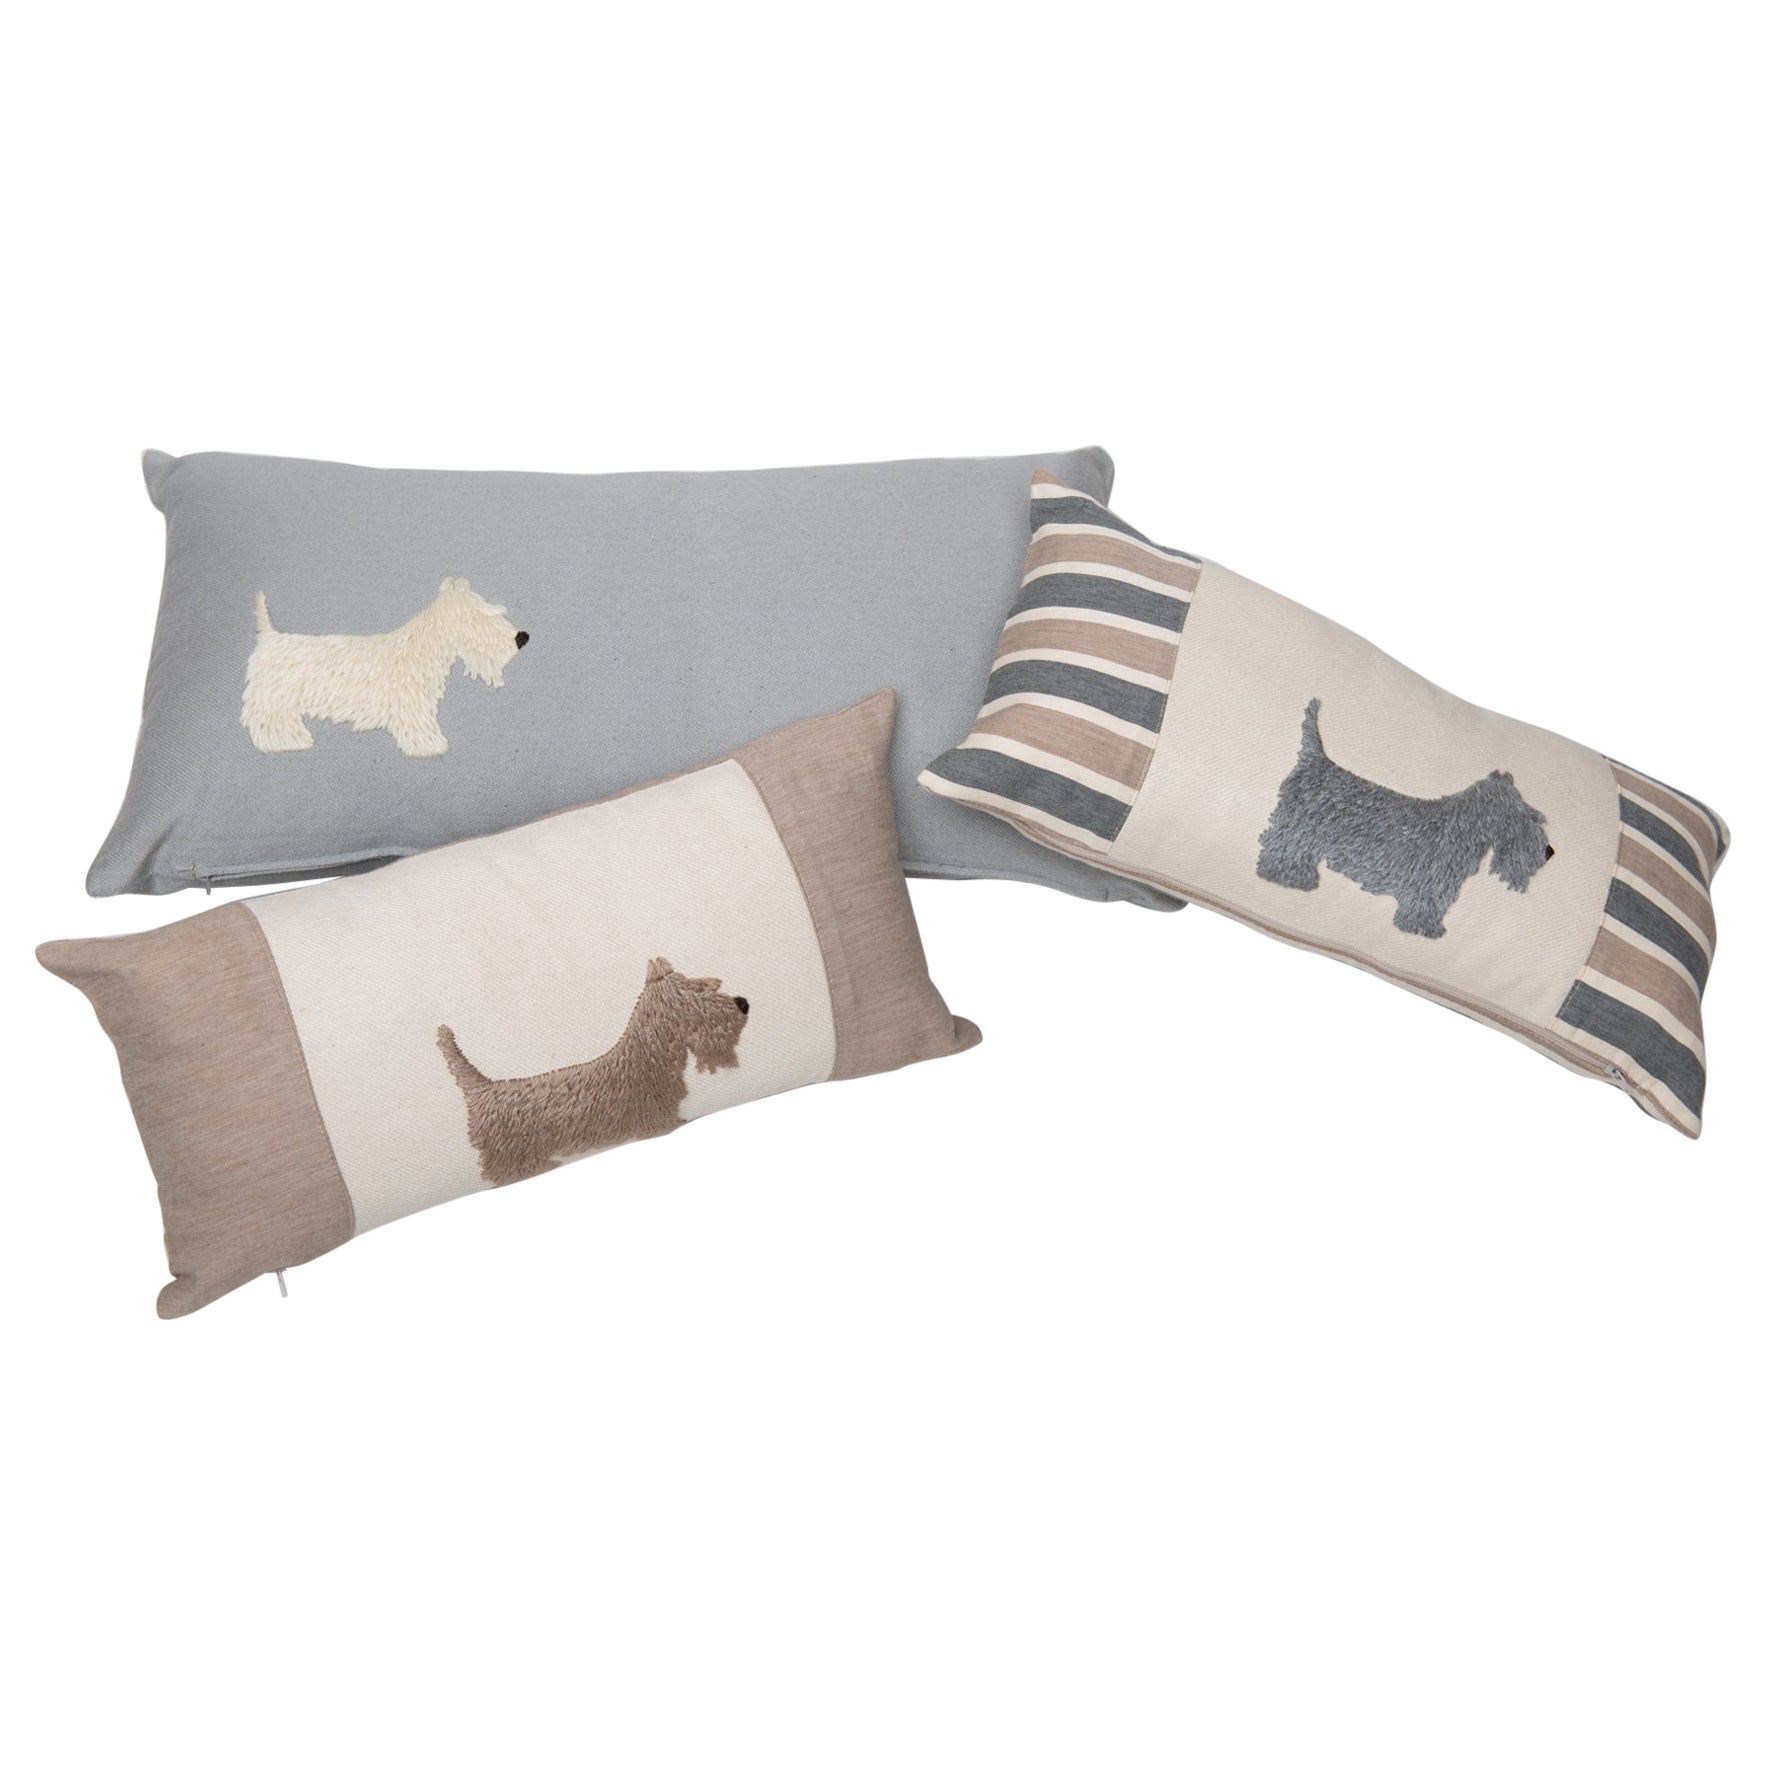 Three Pillows in Cachemire Fabric with a Little Dog For Sale